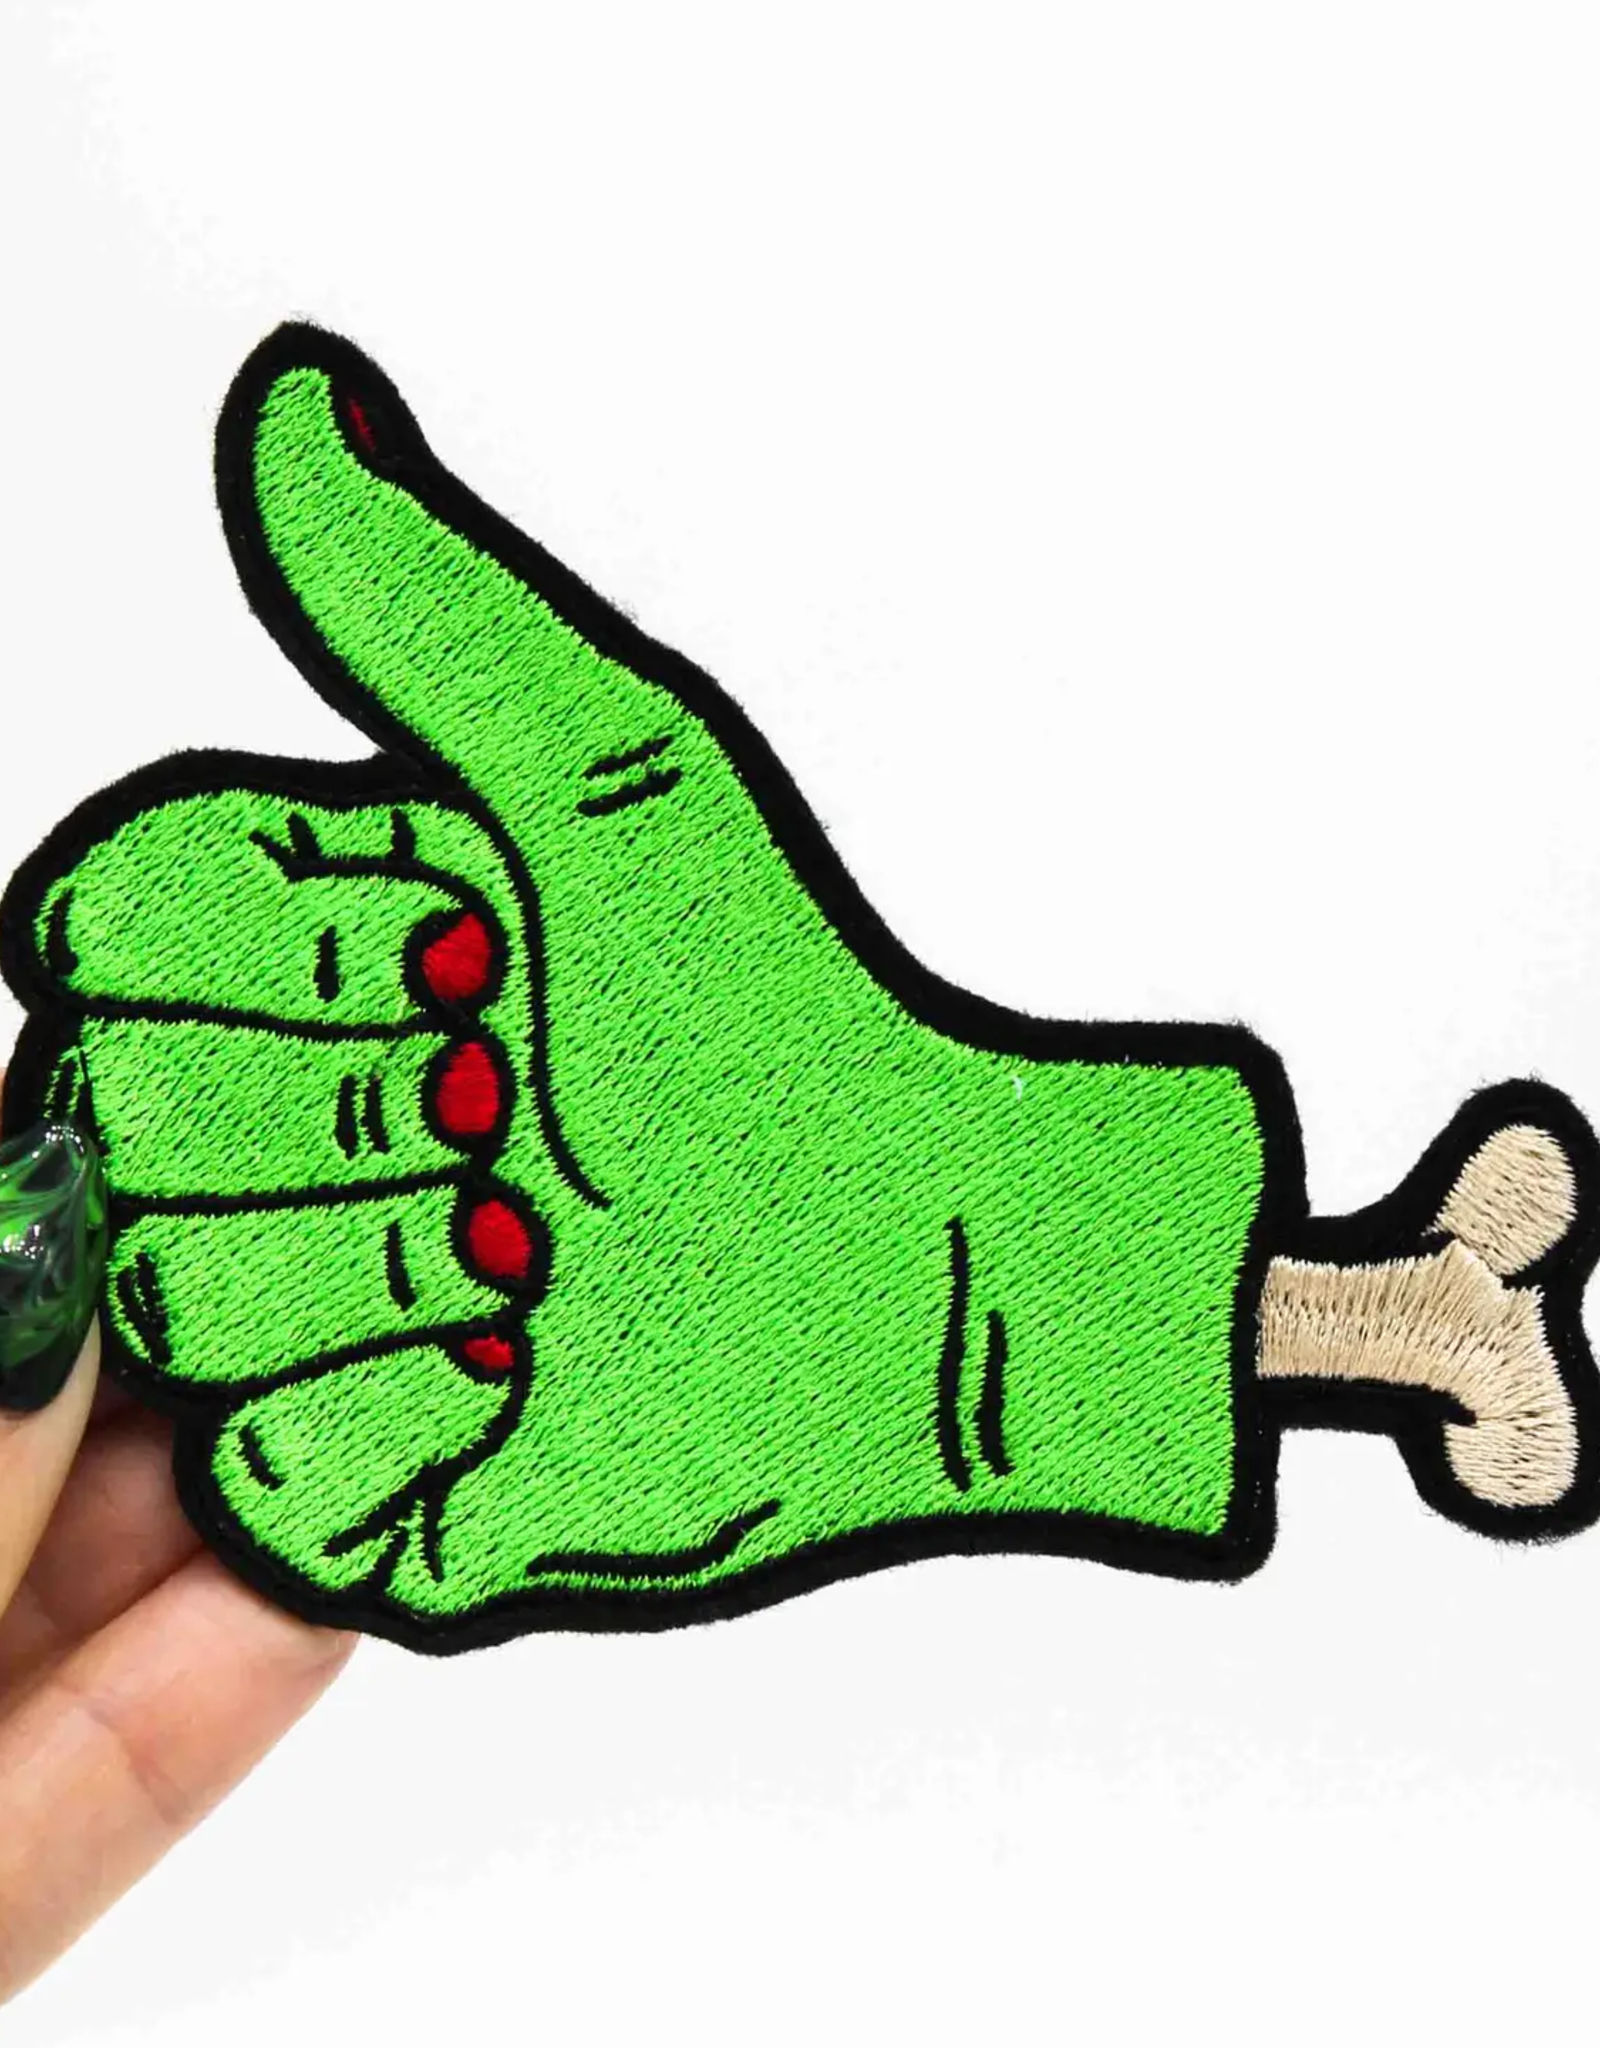 Thumbs Up Zombie Hand Embroidered Iron On Patch